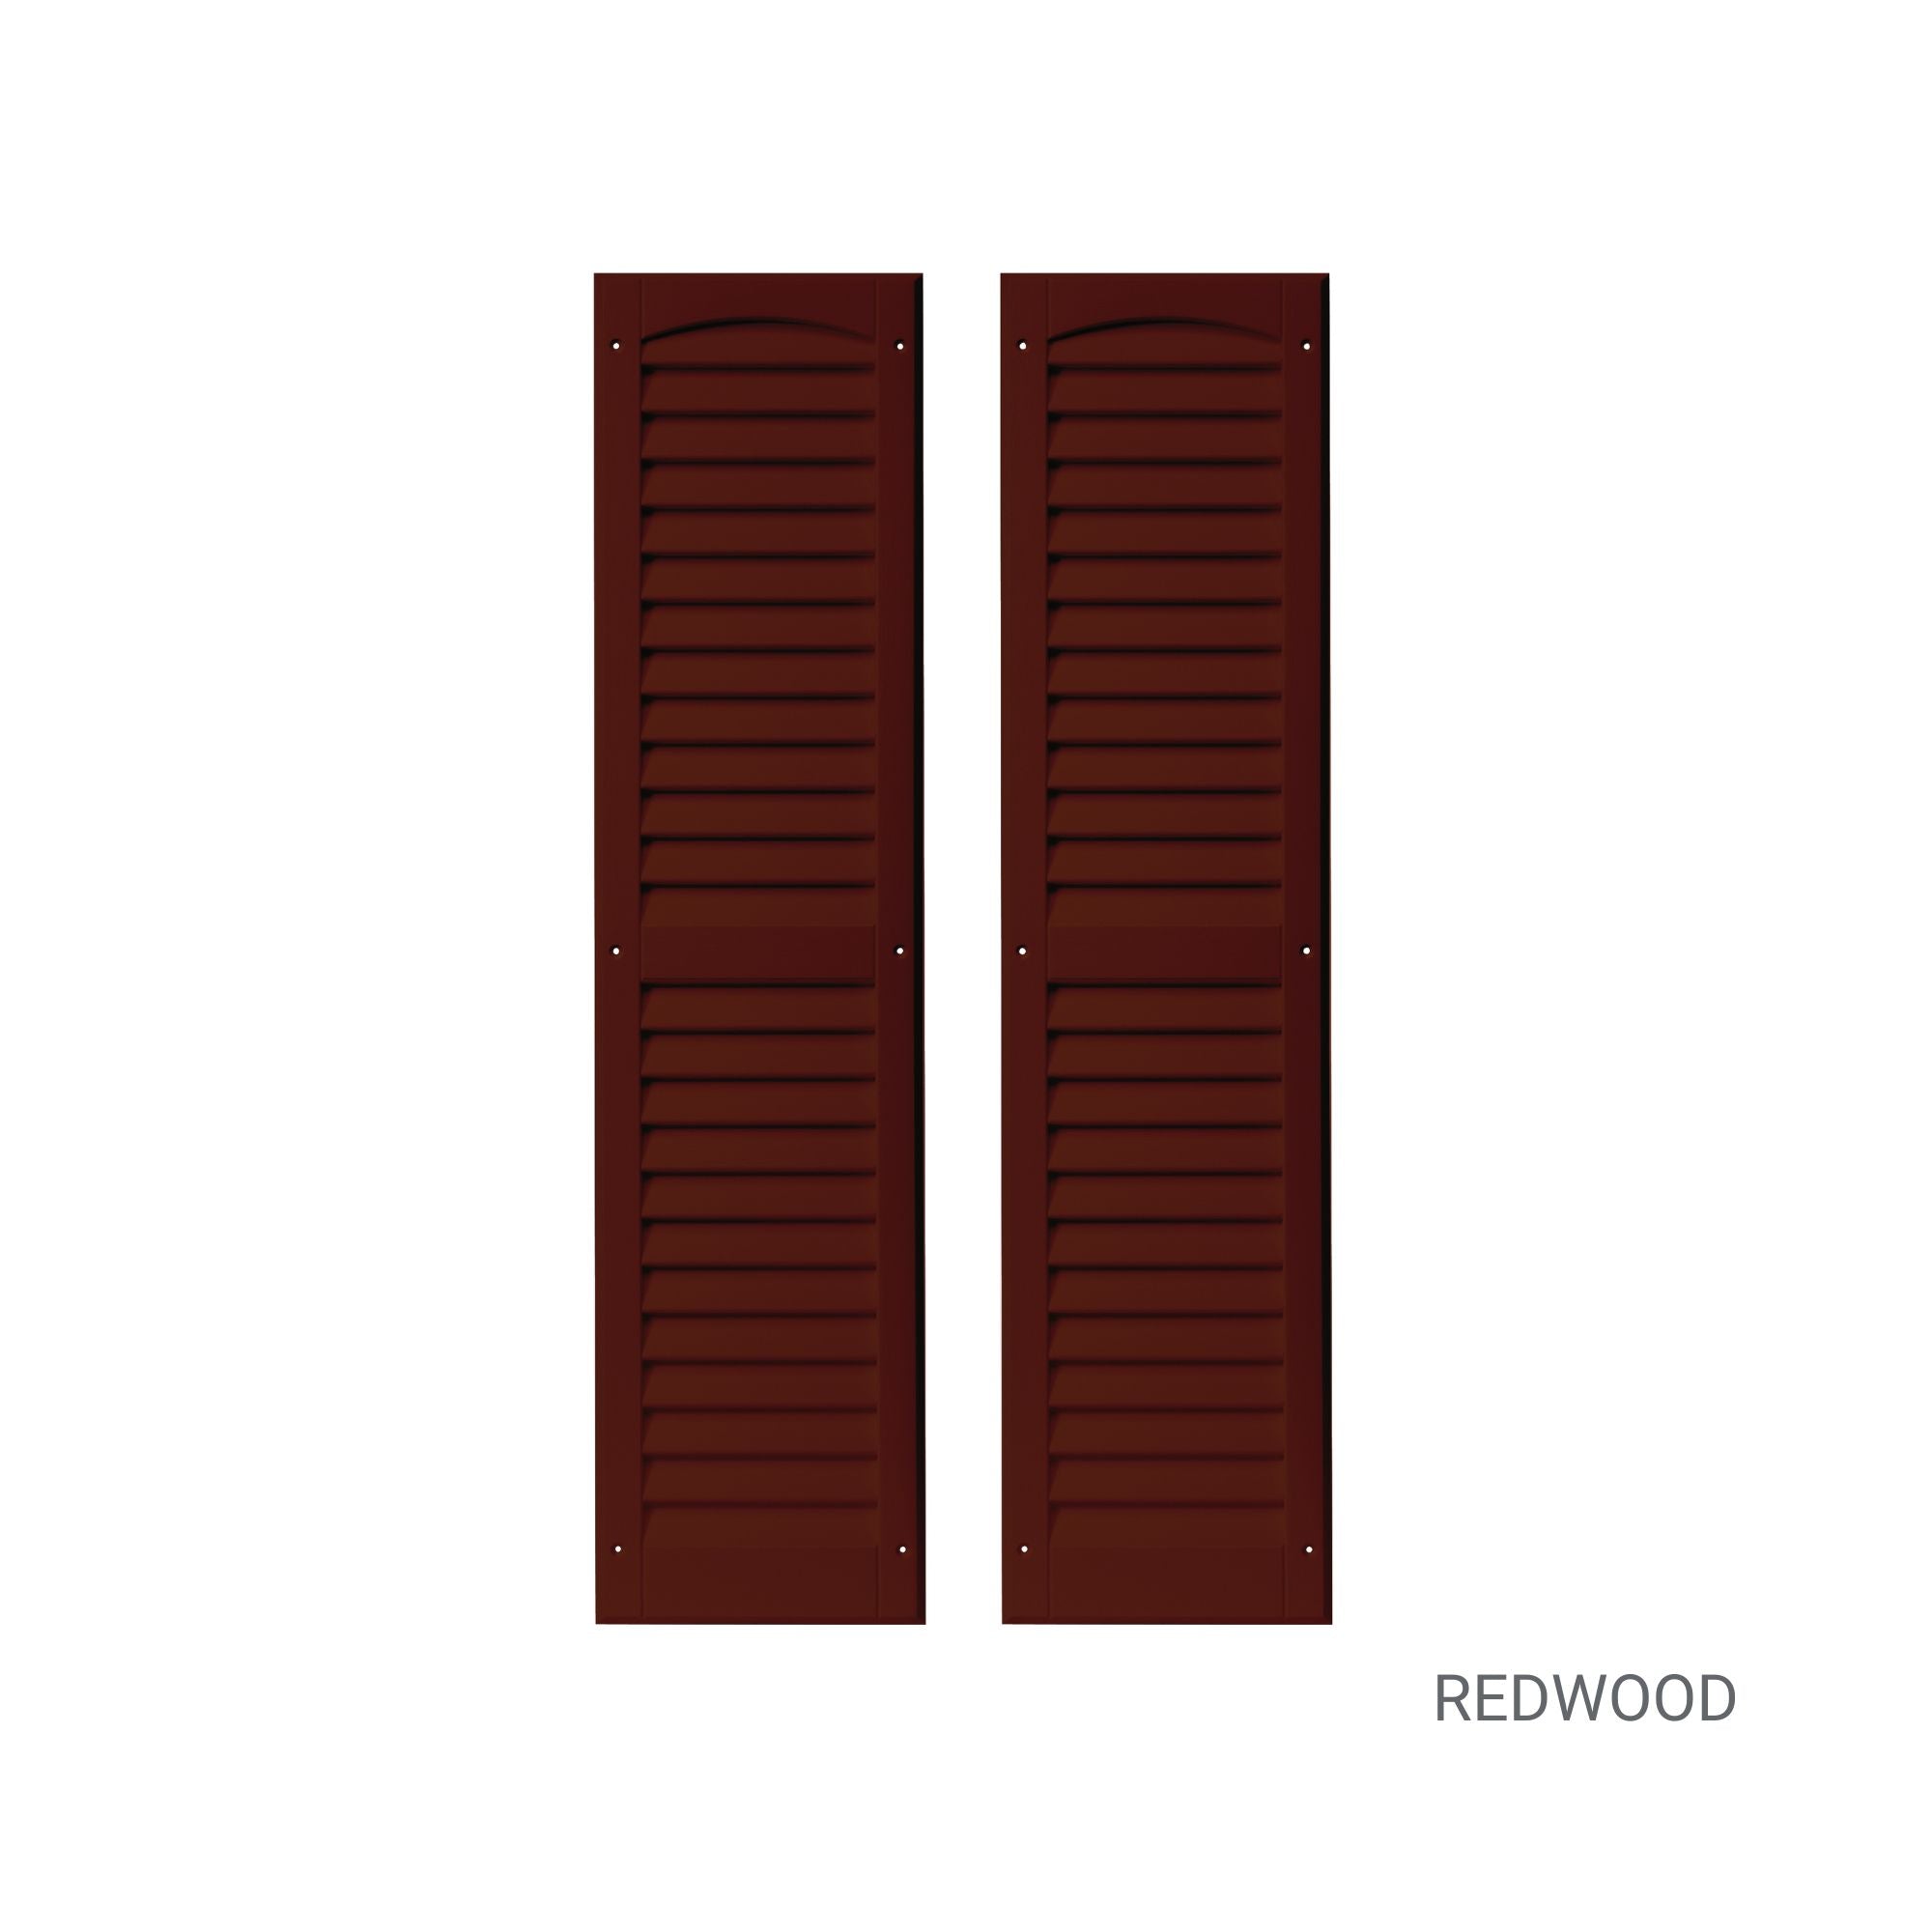 Pair of 9" W x 36" H Louvered Redwood Shutters for Sheds, Playhouses, and MORE